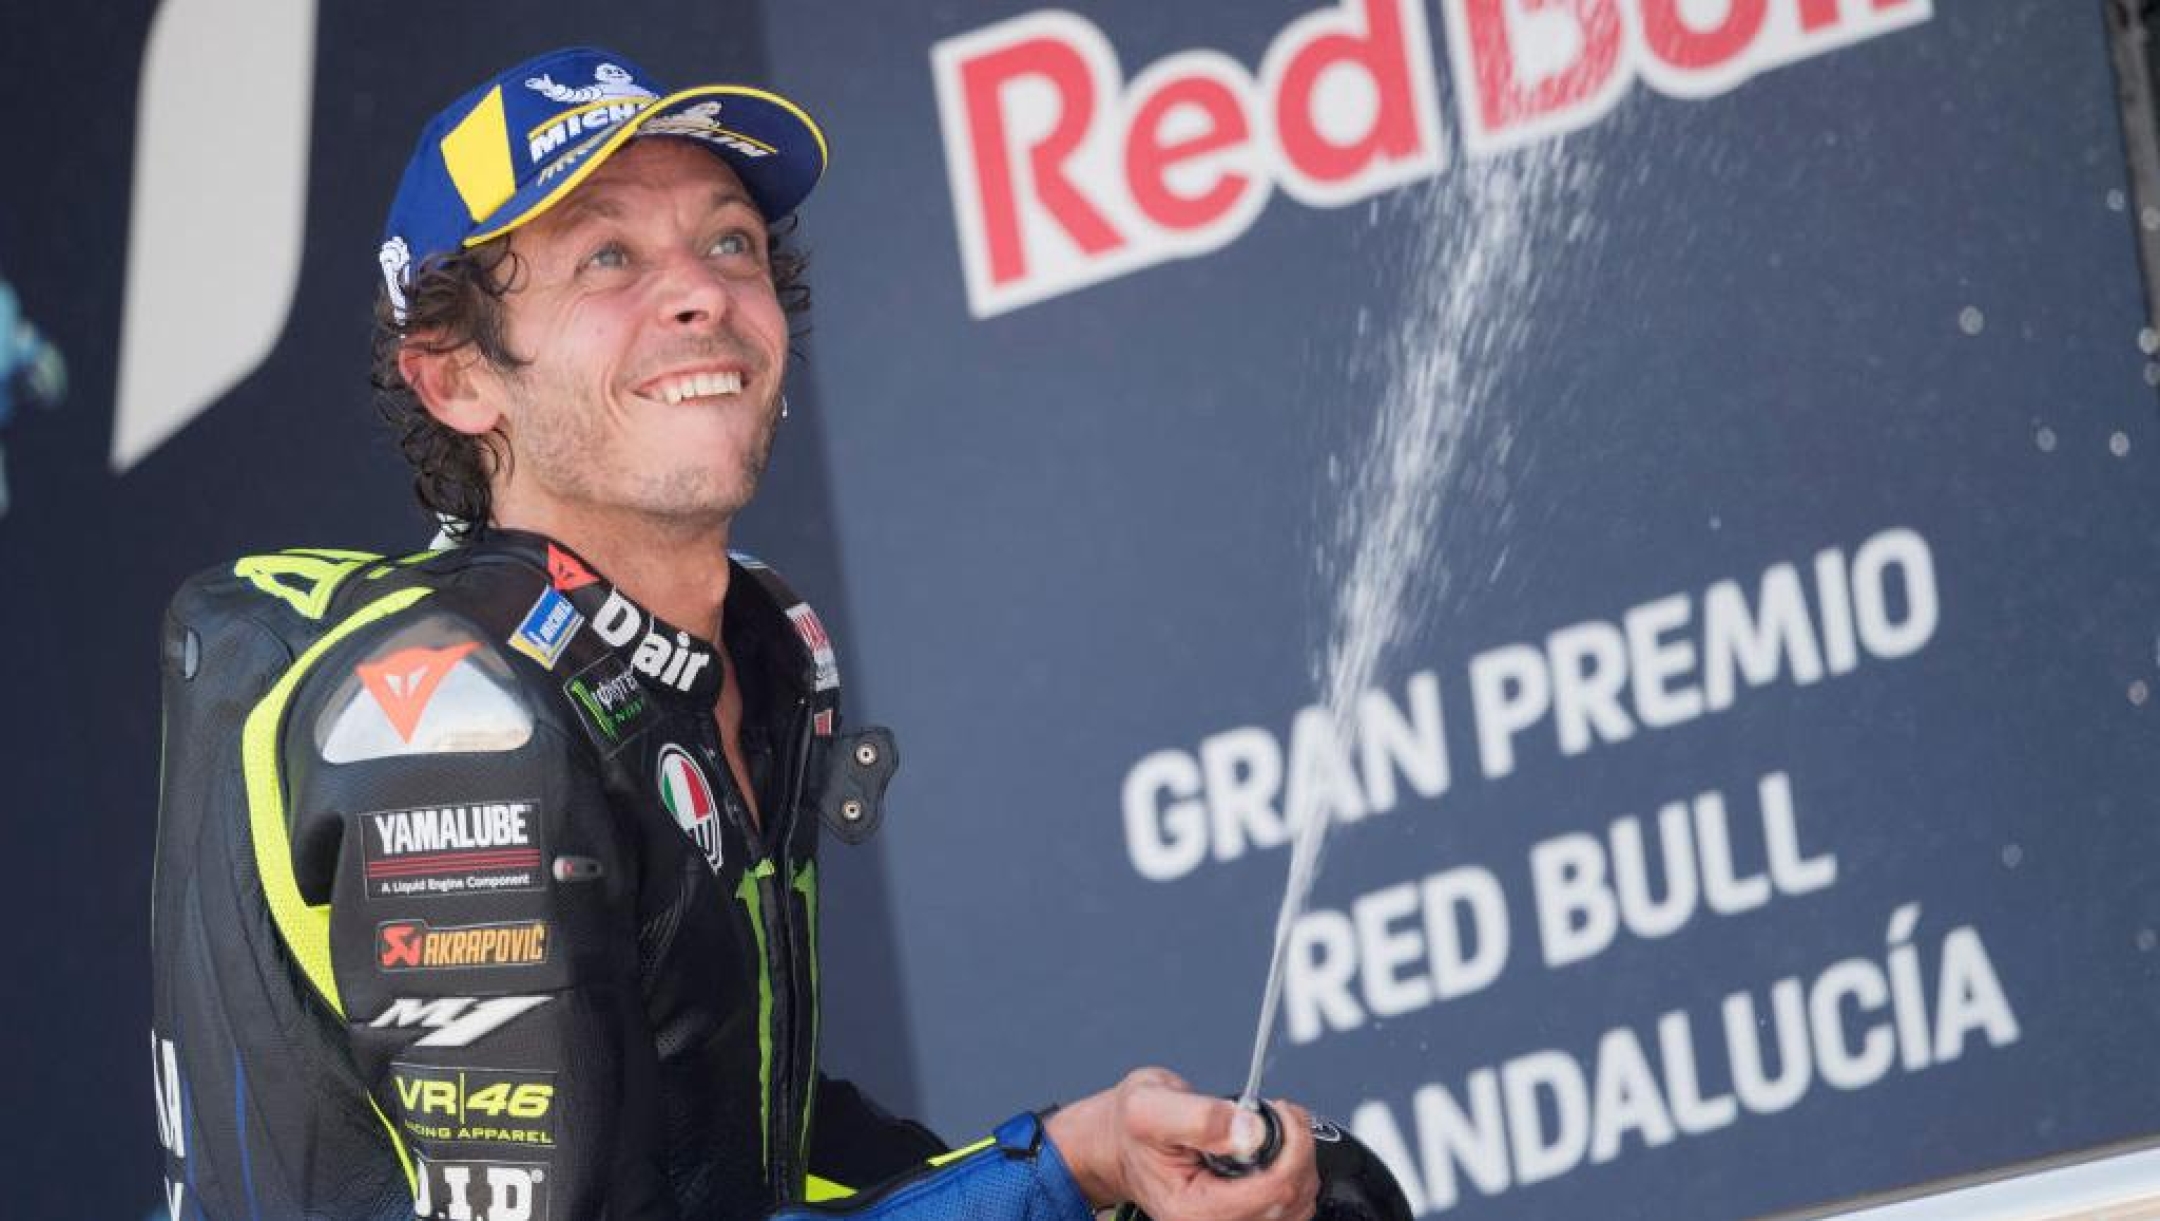 JEREZ DE LA FRONTERA, SPAIN - JULY 26: Valentino Rossi of Italy and Monster Energy Yamaha MotoGP Team celebrates the third place on the podium during the MotoGP race during the MotoGP of Andalucia - Race at Circuito de Jerez on July 26, 2020 in Jerez de la Frontera, Spain. (Photo by Mirco Lazzari gp/Getty Images)